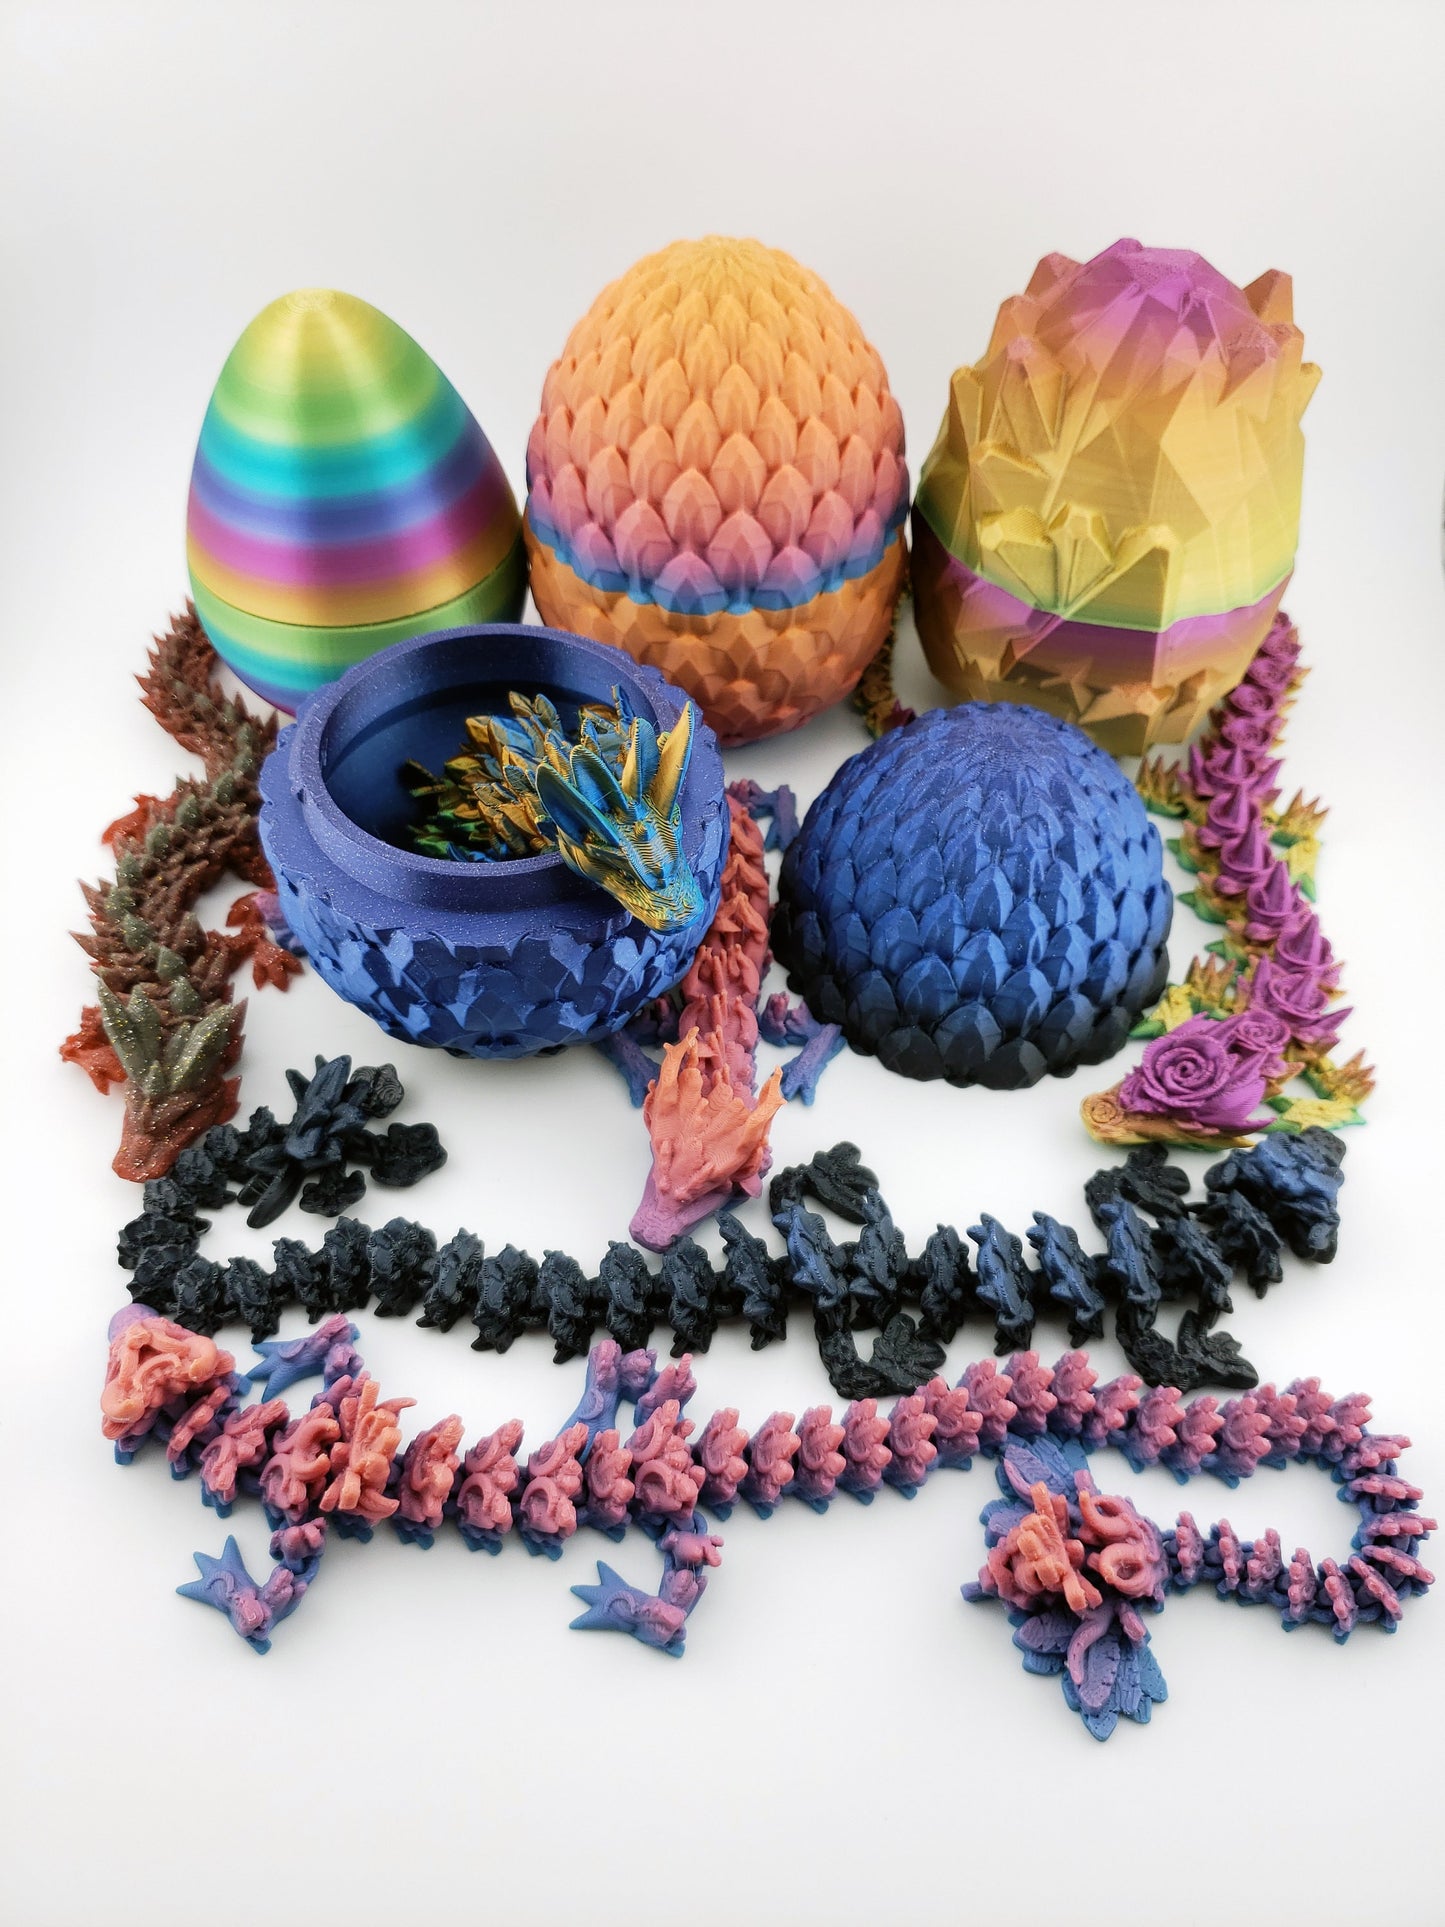 Mystery Dragon Eggs - Articulated Dragons - 3 Different Eggs - 7 Different Dragons - ~12 Inches